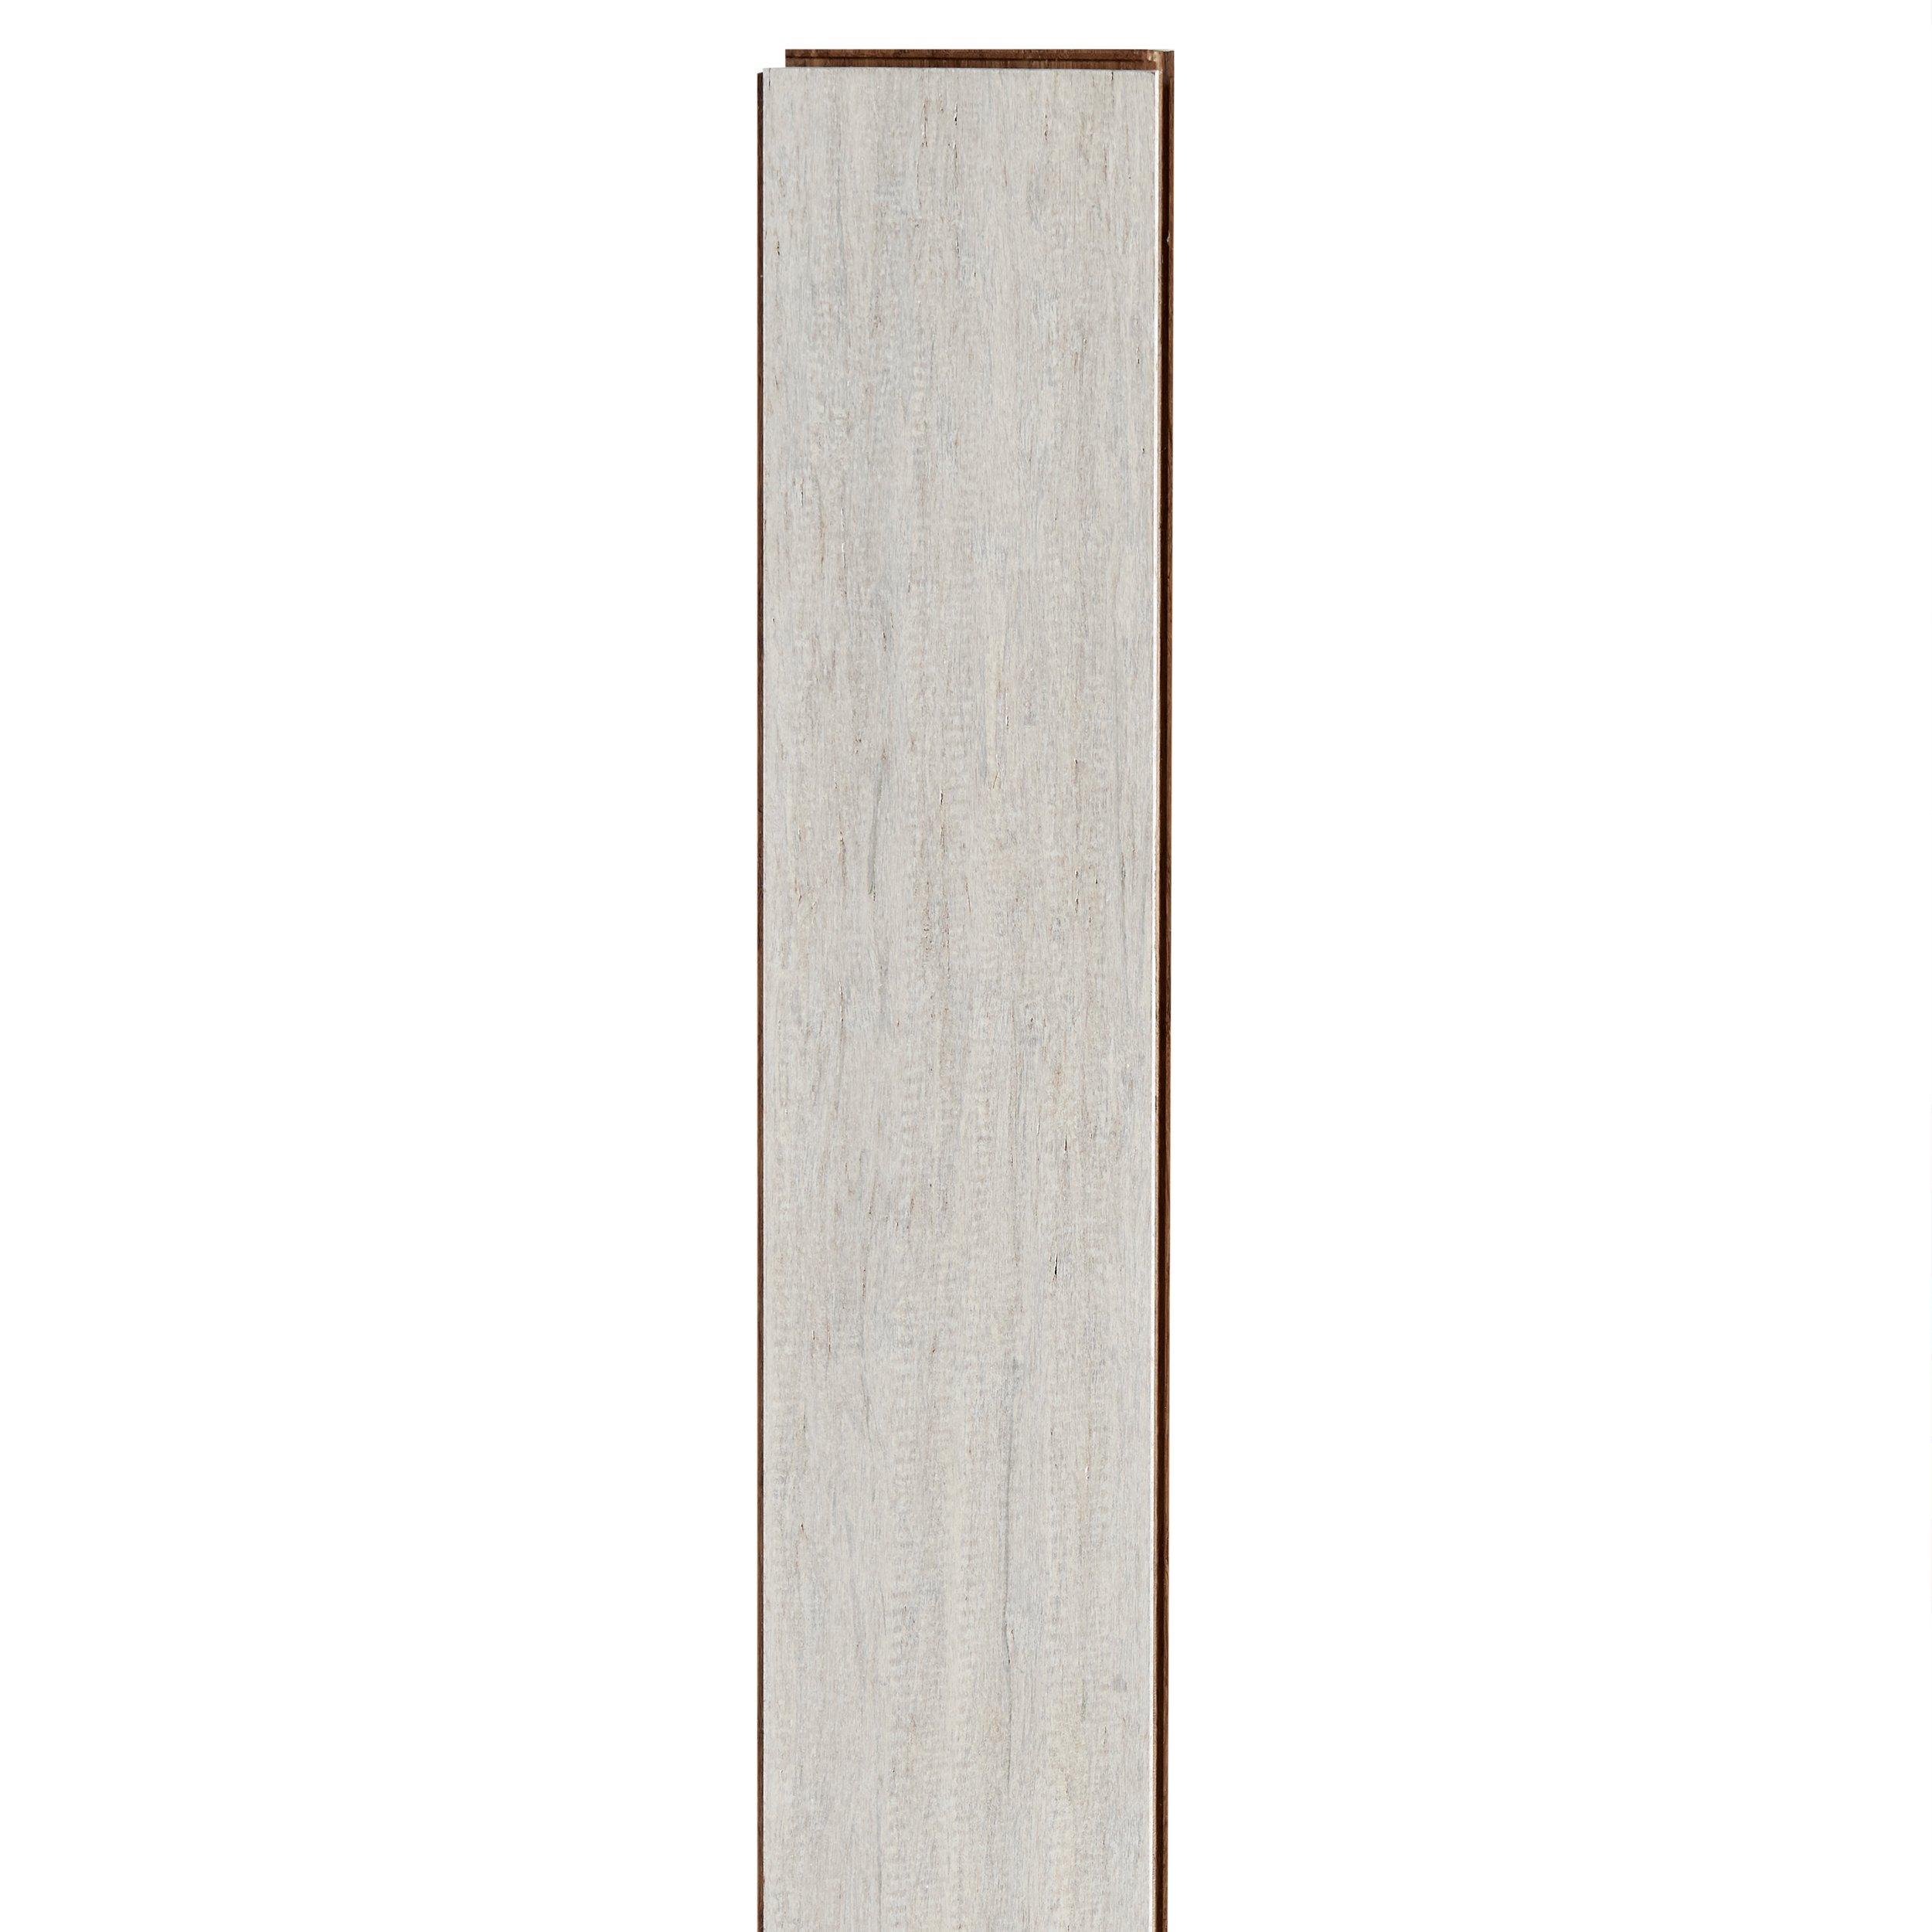 Aurora Distressed Wire-Brushed Locking Solid Stranded Bamboo